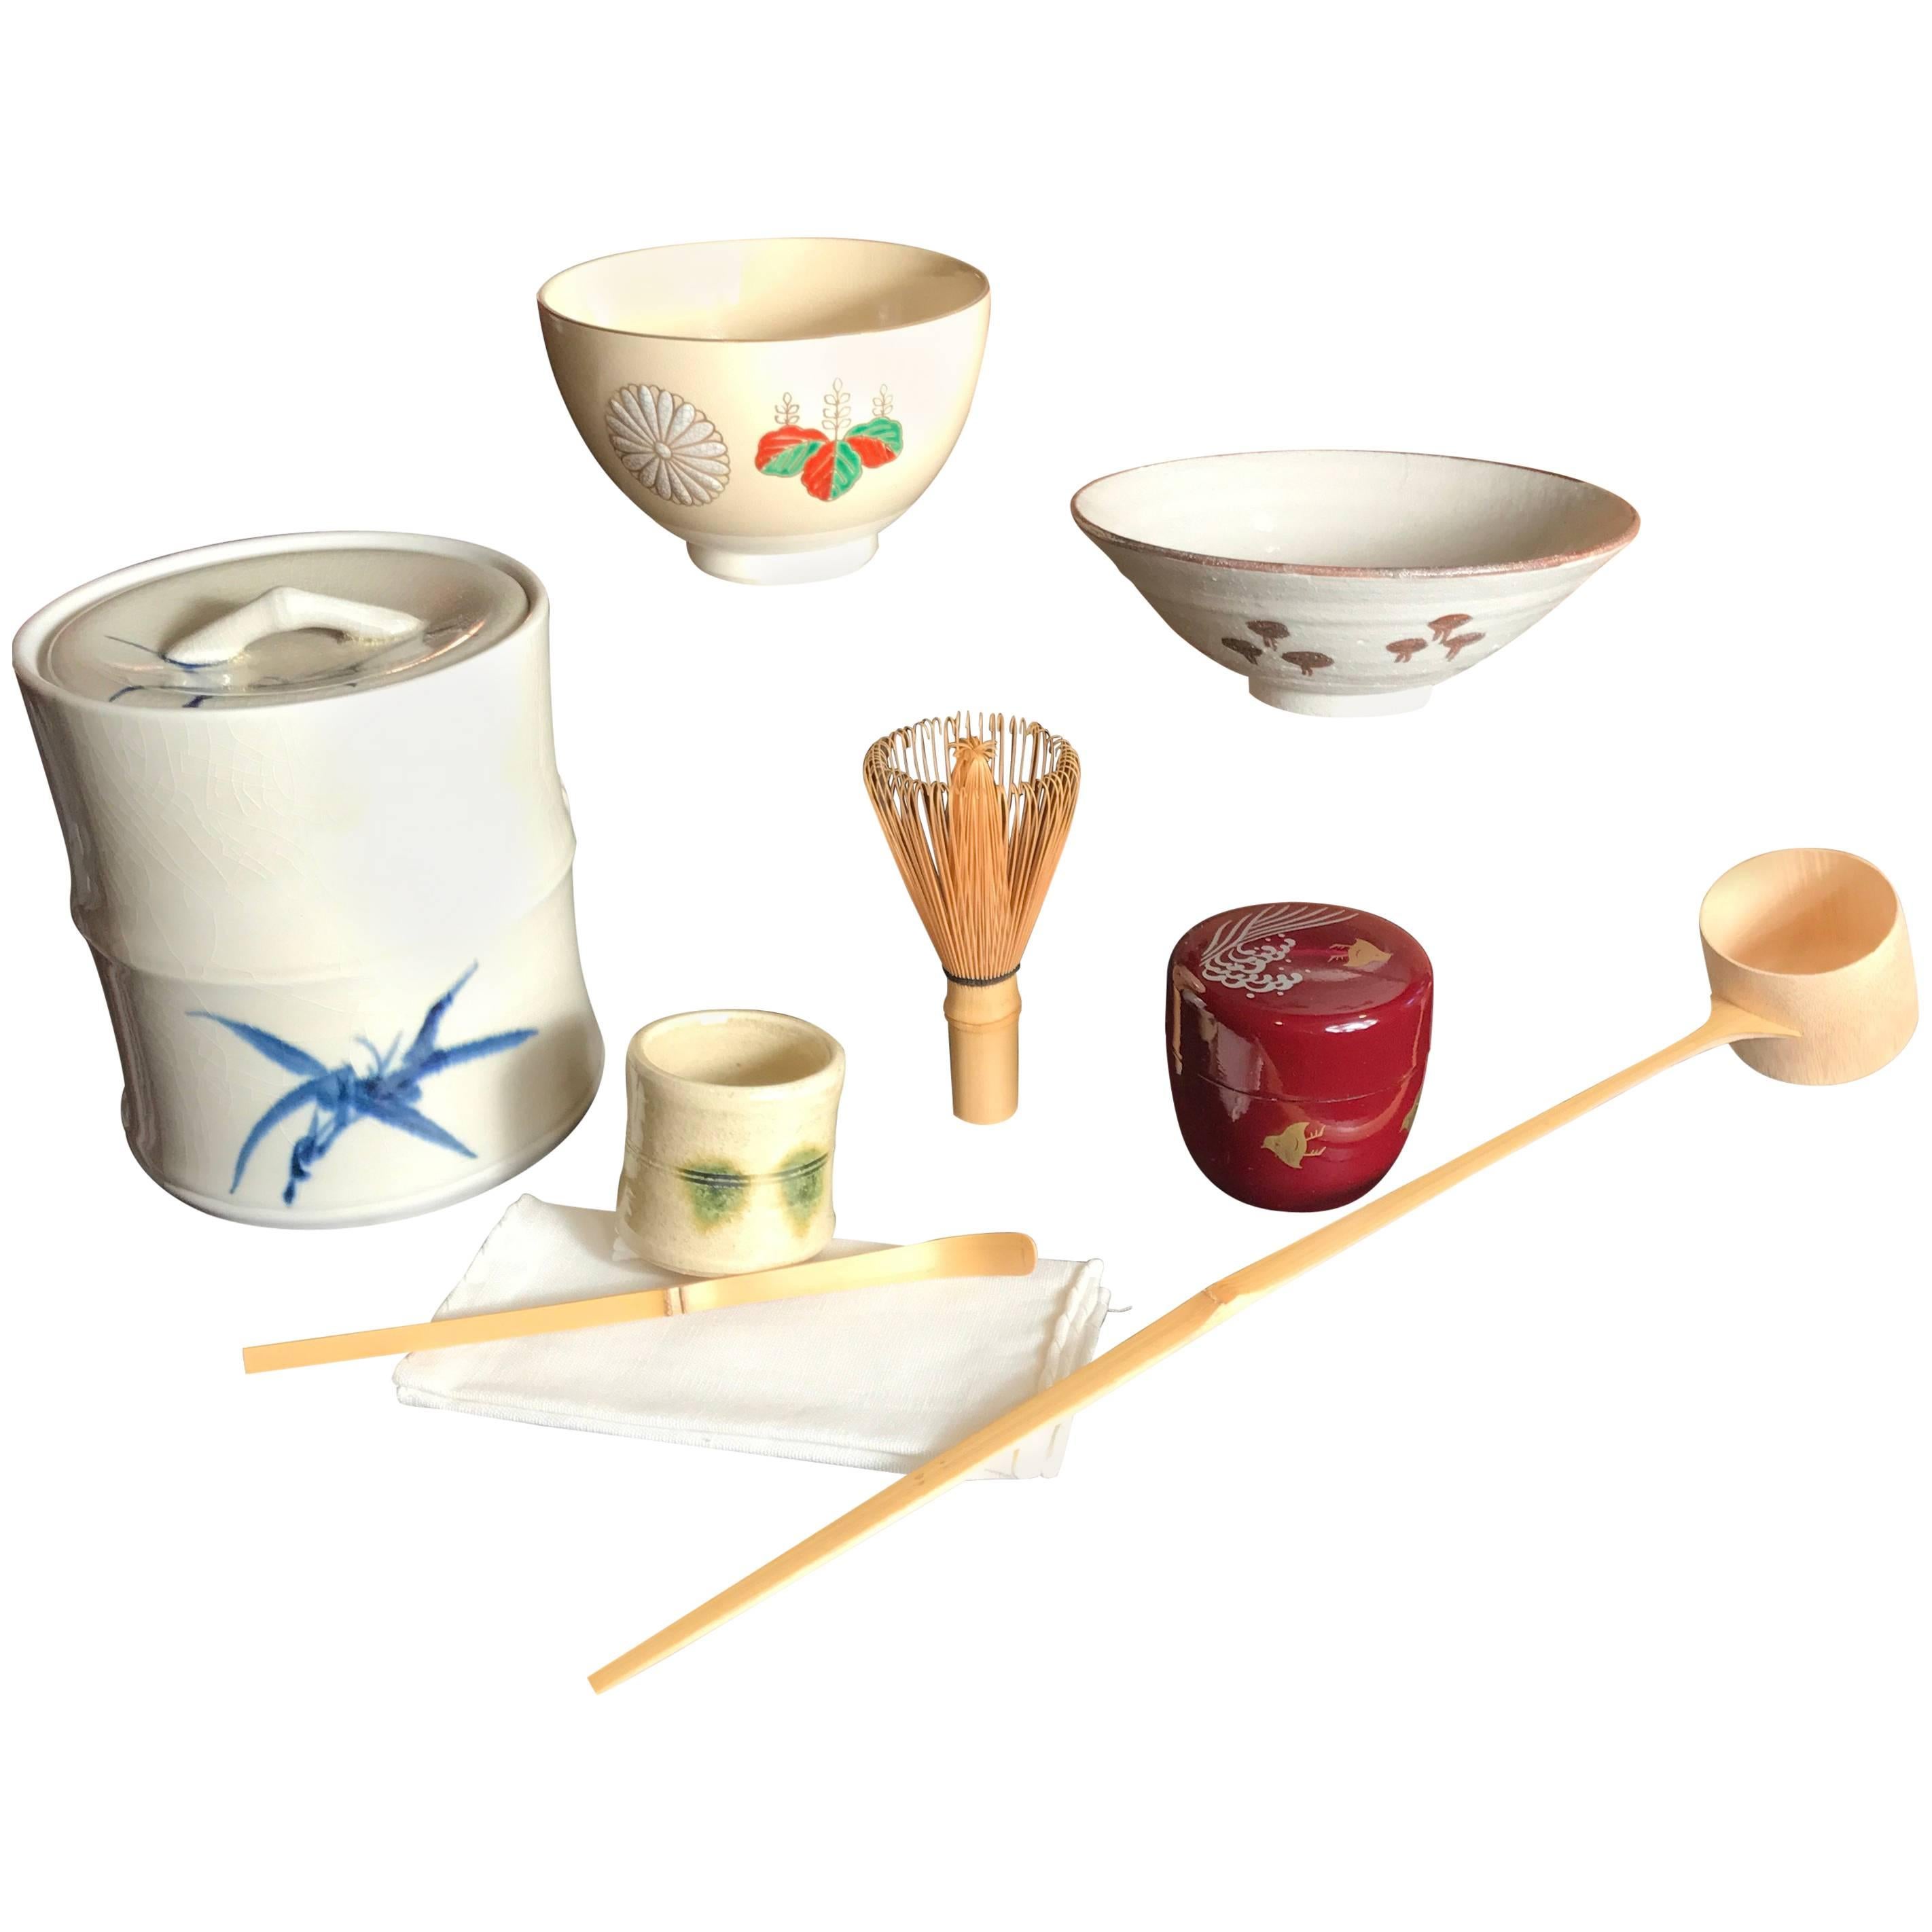 Signed, mint and boxed.

Japan, a superior and fine old tea ceremony nine-piece set,
Natsume Ochawan futaoki.

This is a complete antique Japanese tea ceremony set consisting of Mizusashi, two Ochawan, Natsume, Chashaku, Futaoki and Chashi in